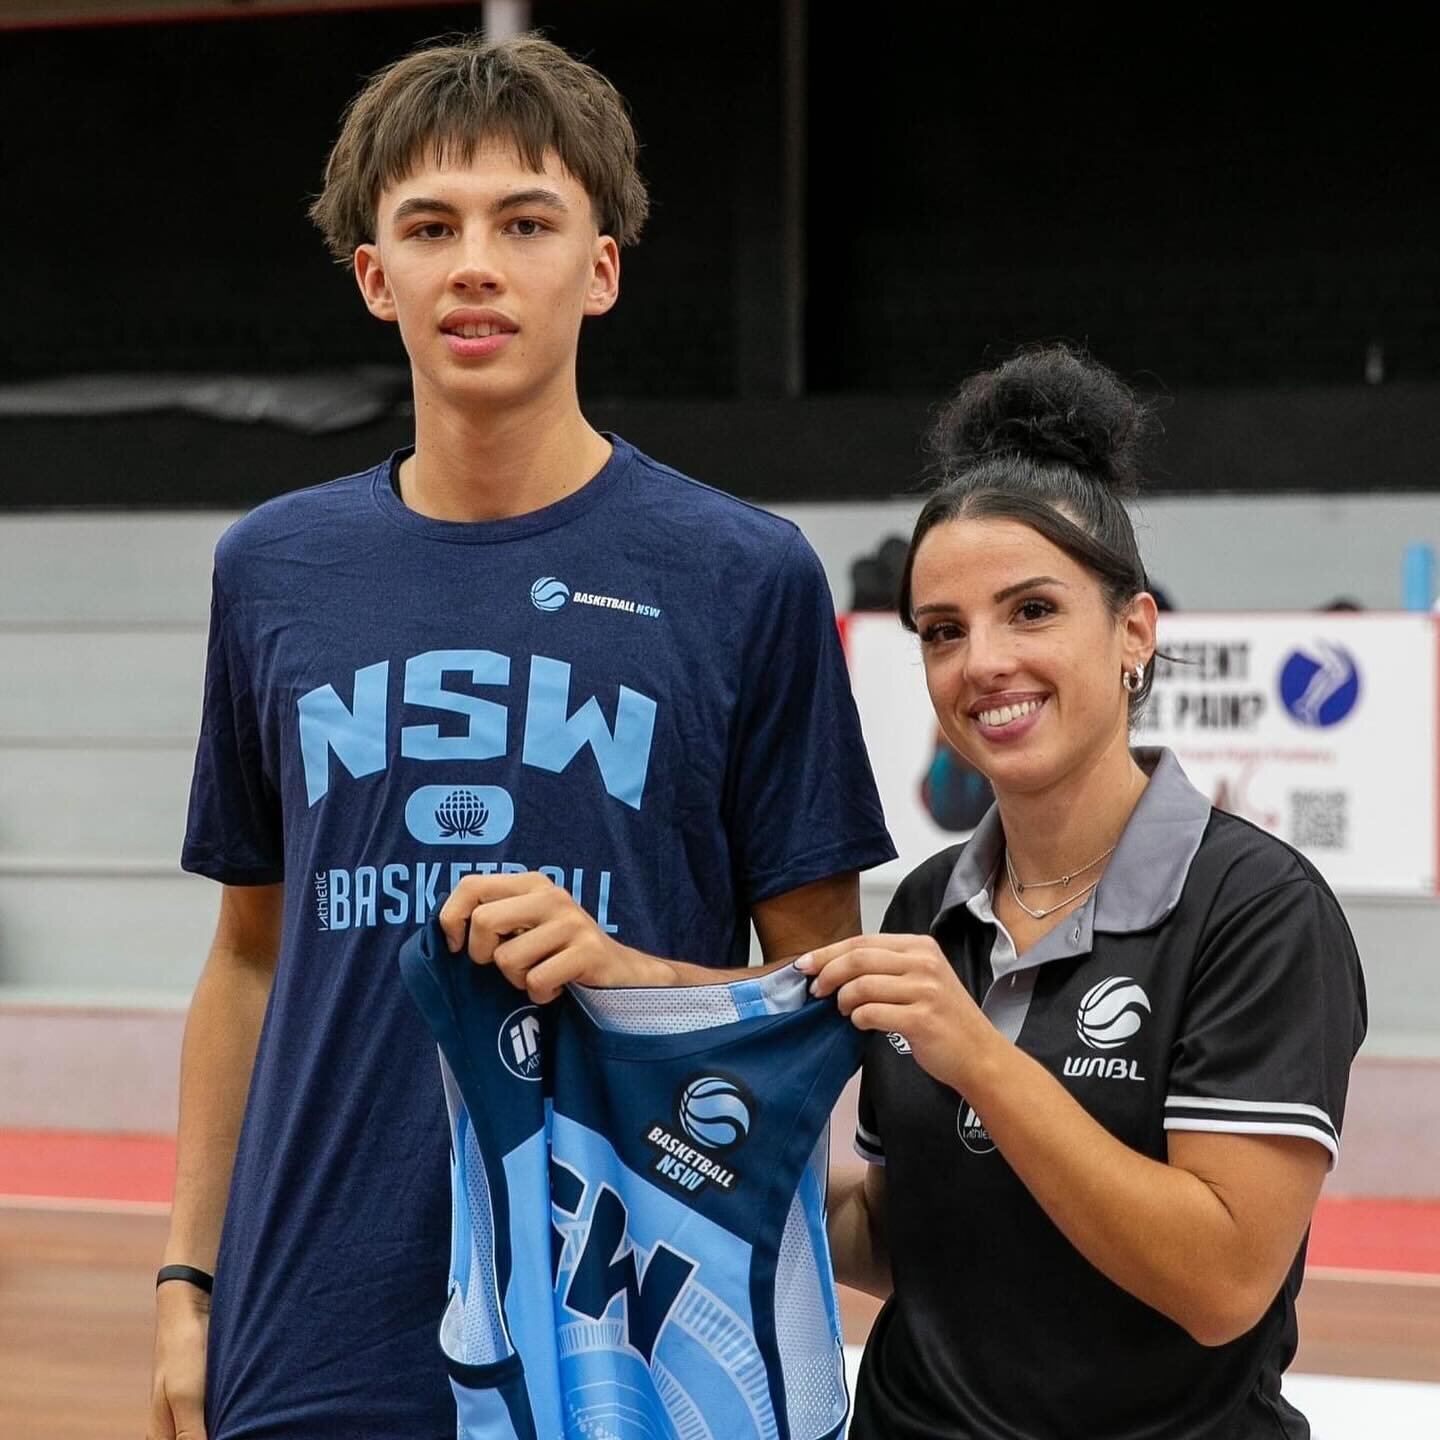 U18 NSW METRO V COUNTRY JERSEY PRESENTATION
 
This past Saturday, our Norths Bears state representatives took part in the annual U18 NSW Metro v NSW Country Jersey Presentation &amp; Clash! 
 
Congratulations to all our athletes who have worked hard 